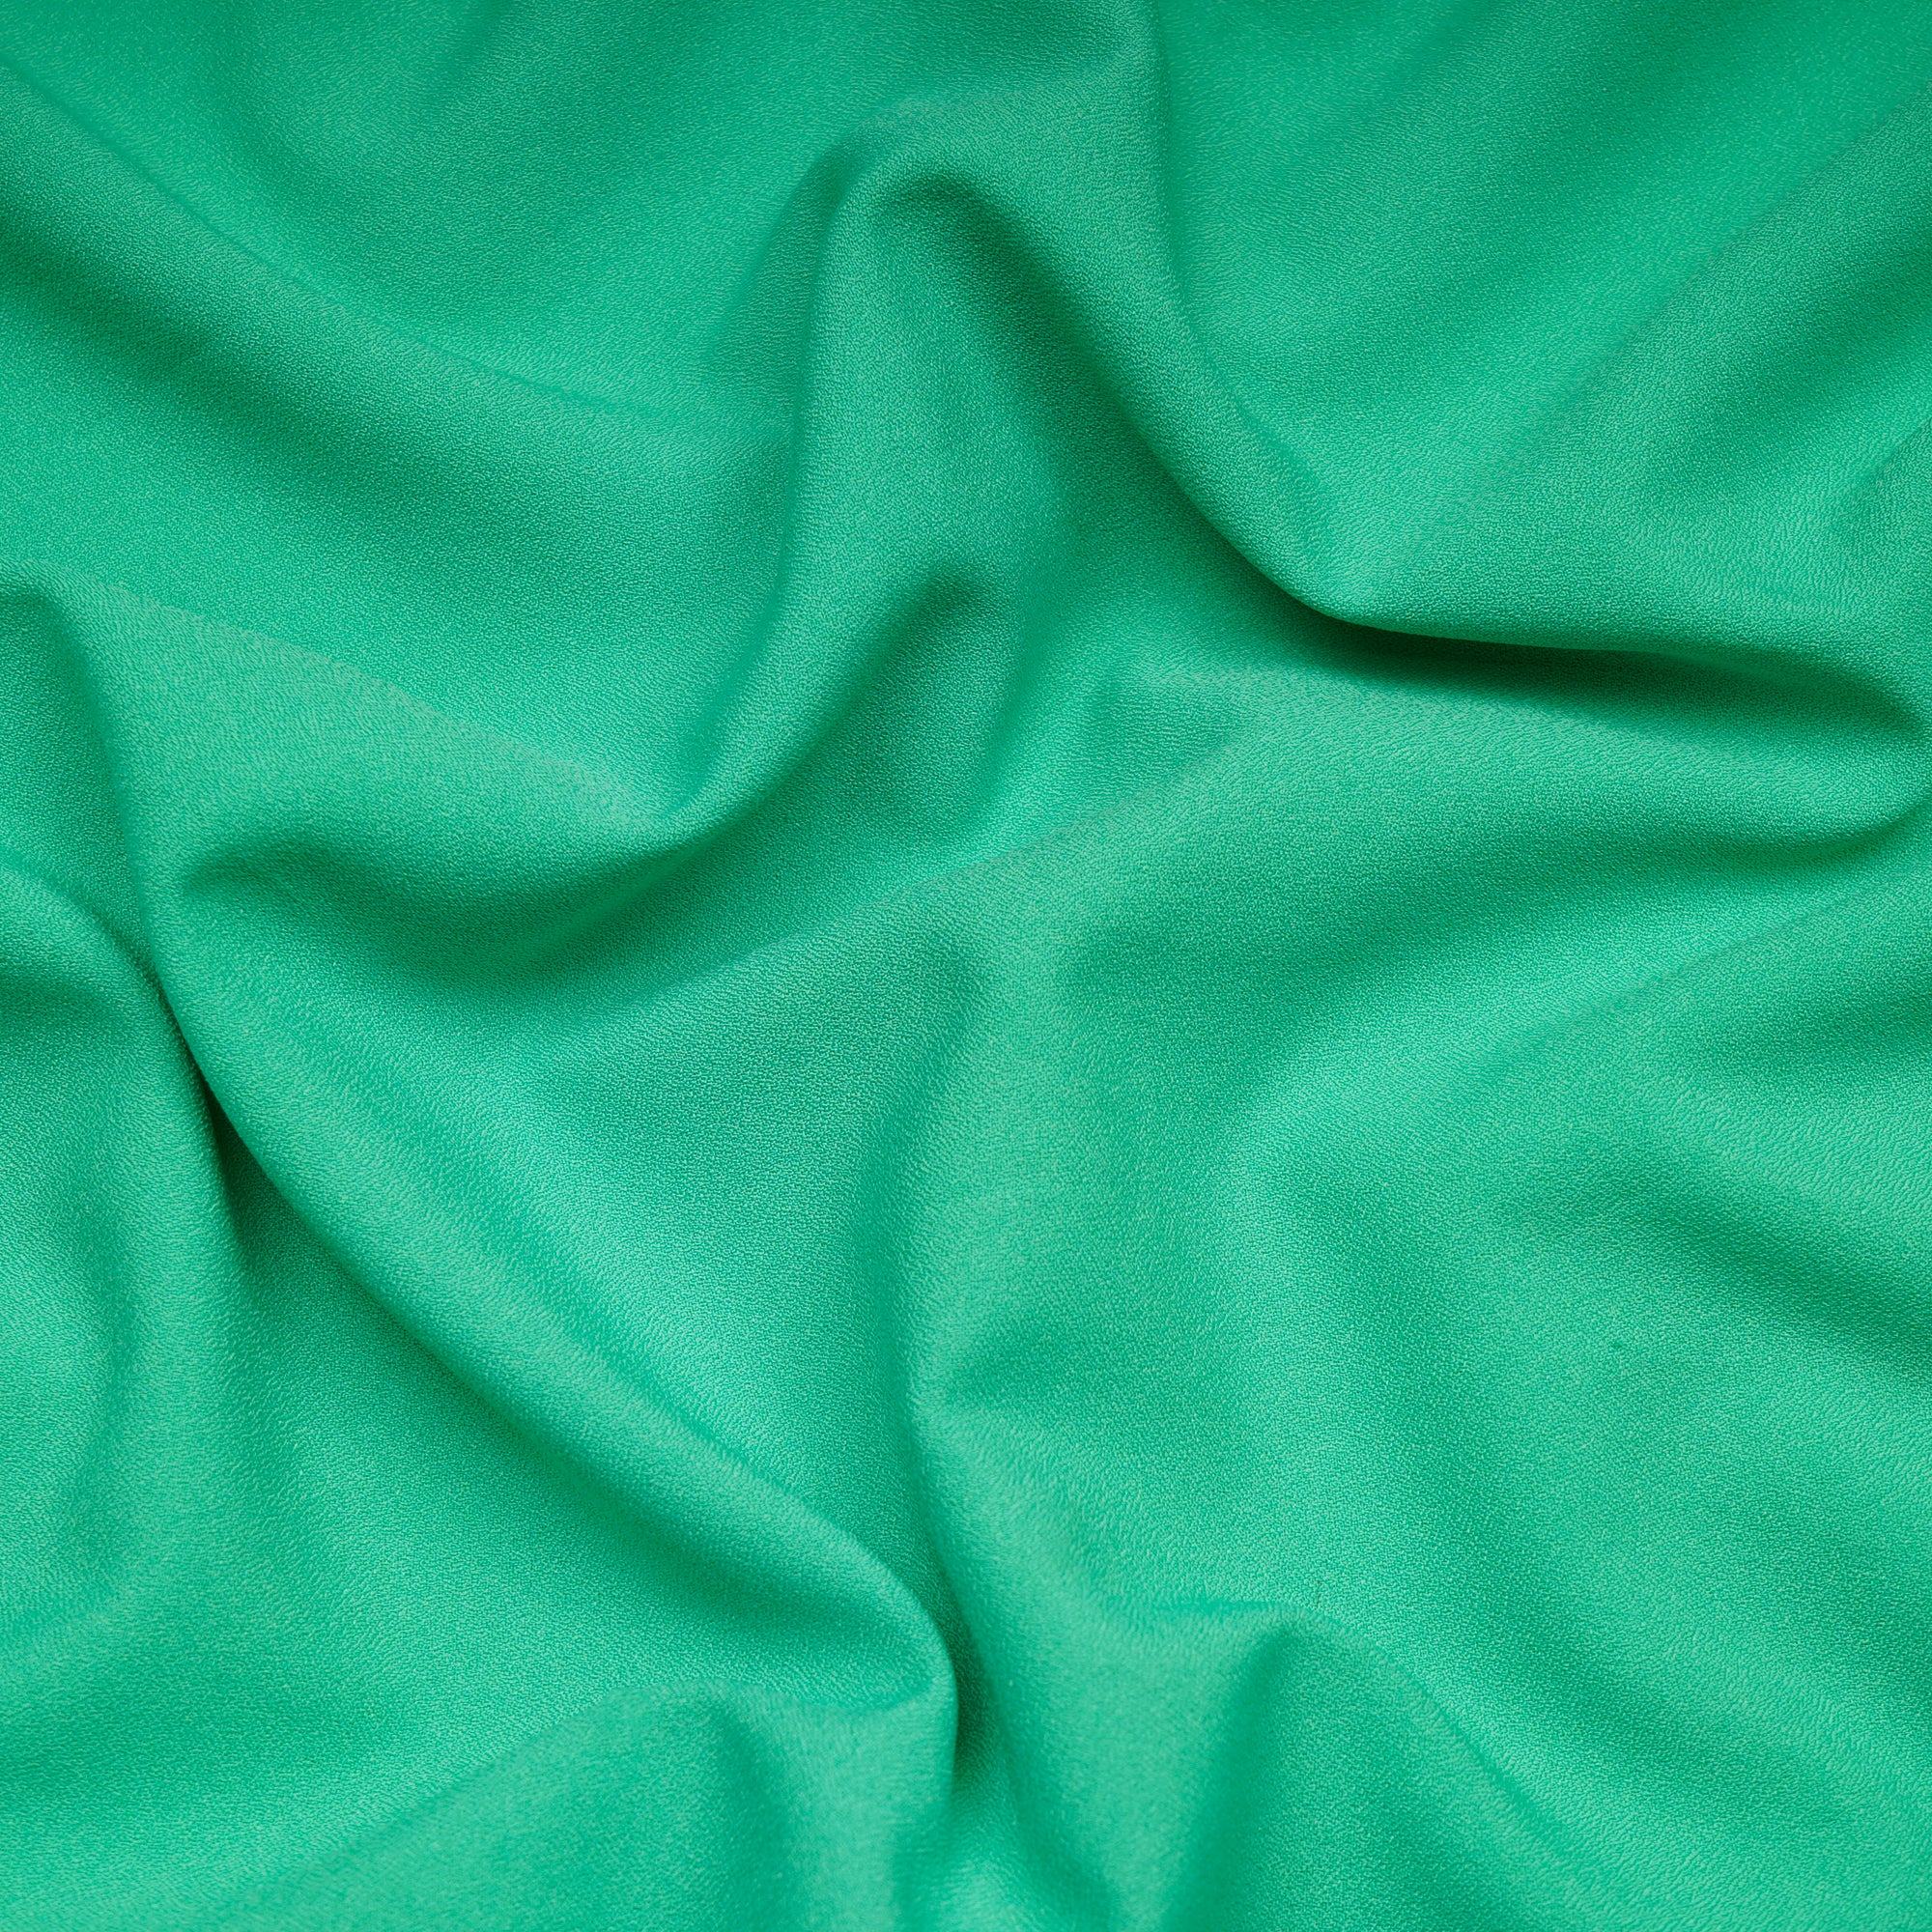 Irish Green Solid Dyed Imported Moss Crepe Fabric (60" Width)